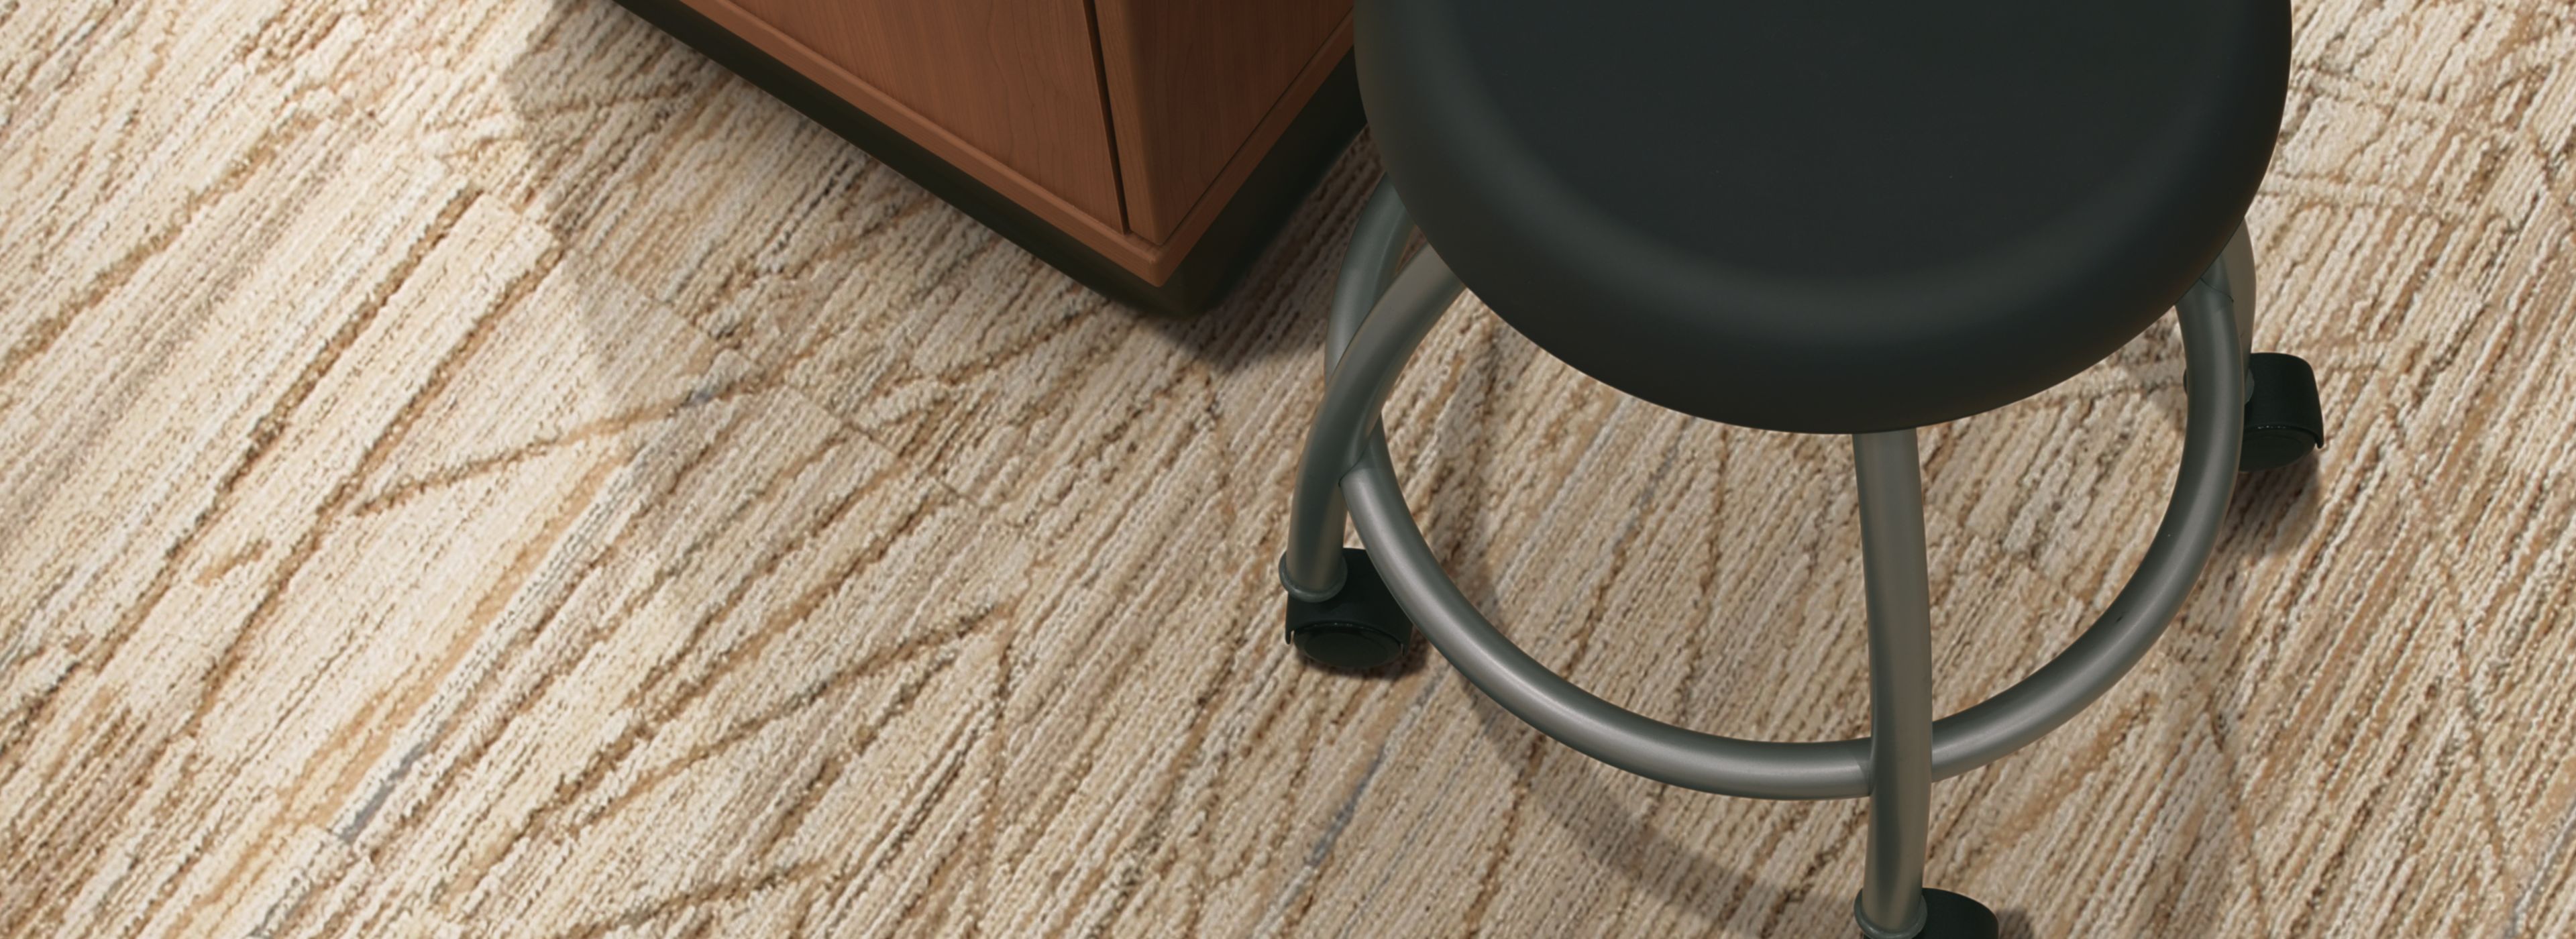 Interface Prairie Grass carpet tile in close up view with stool and cabinet imagen número 1